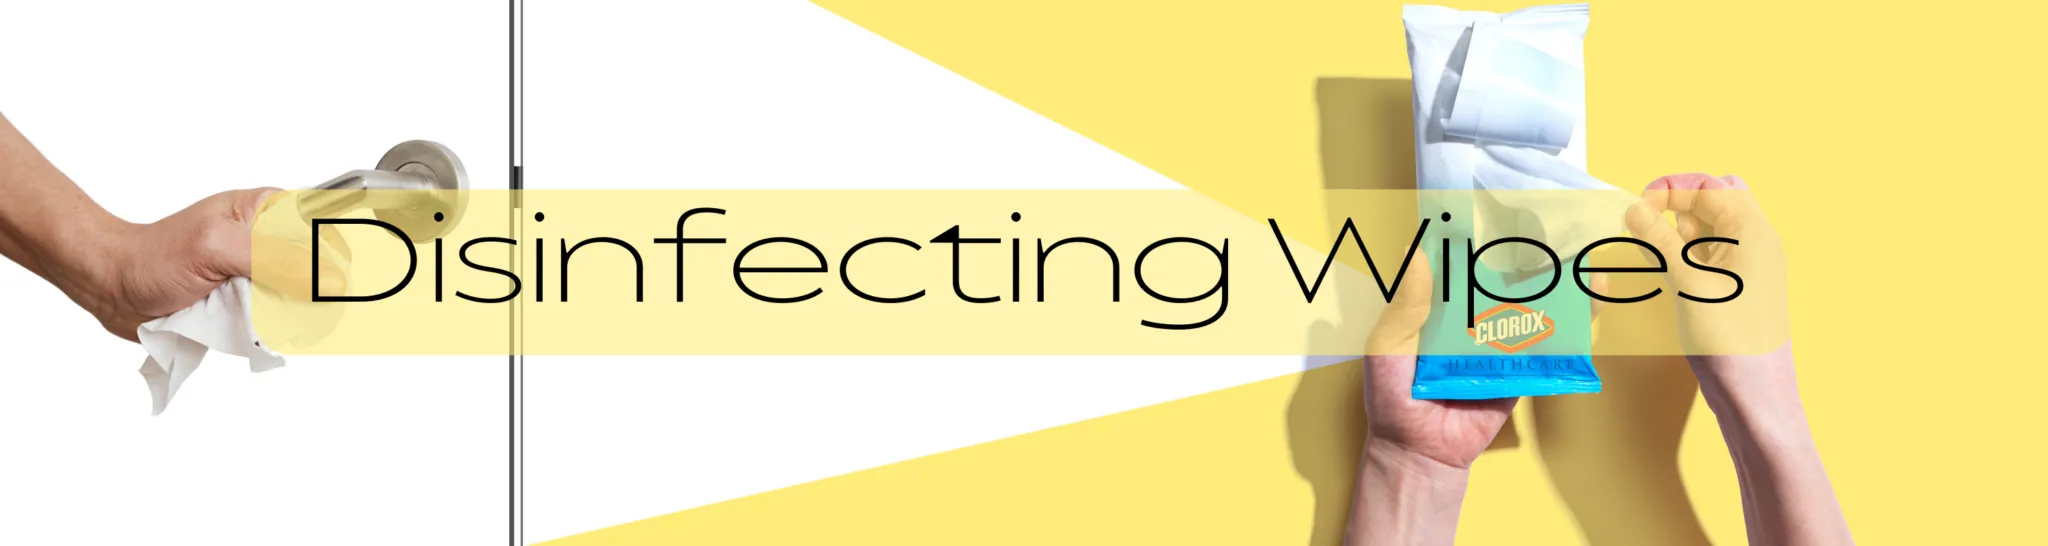 Disinfecting-Wipes-Banner-2048x546